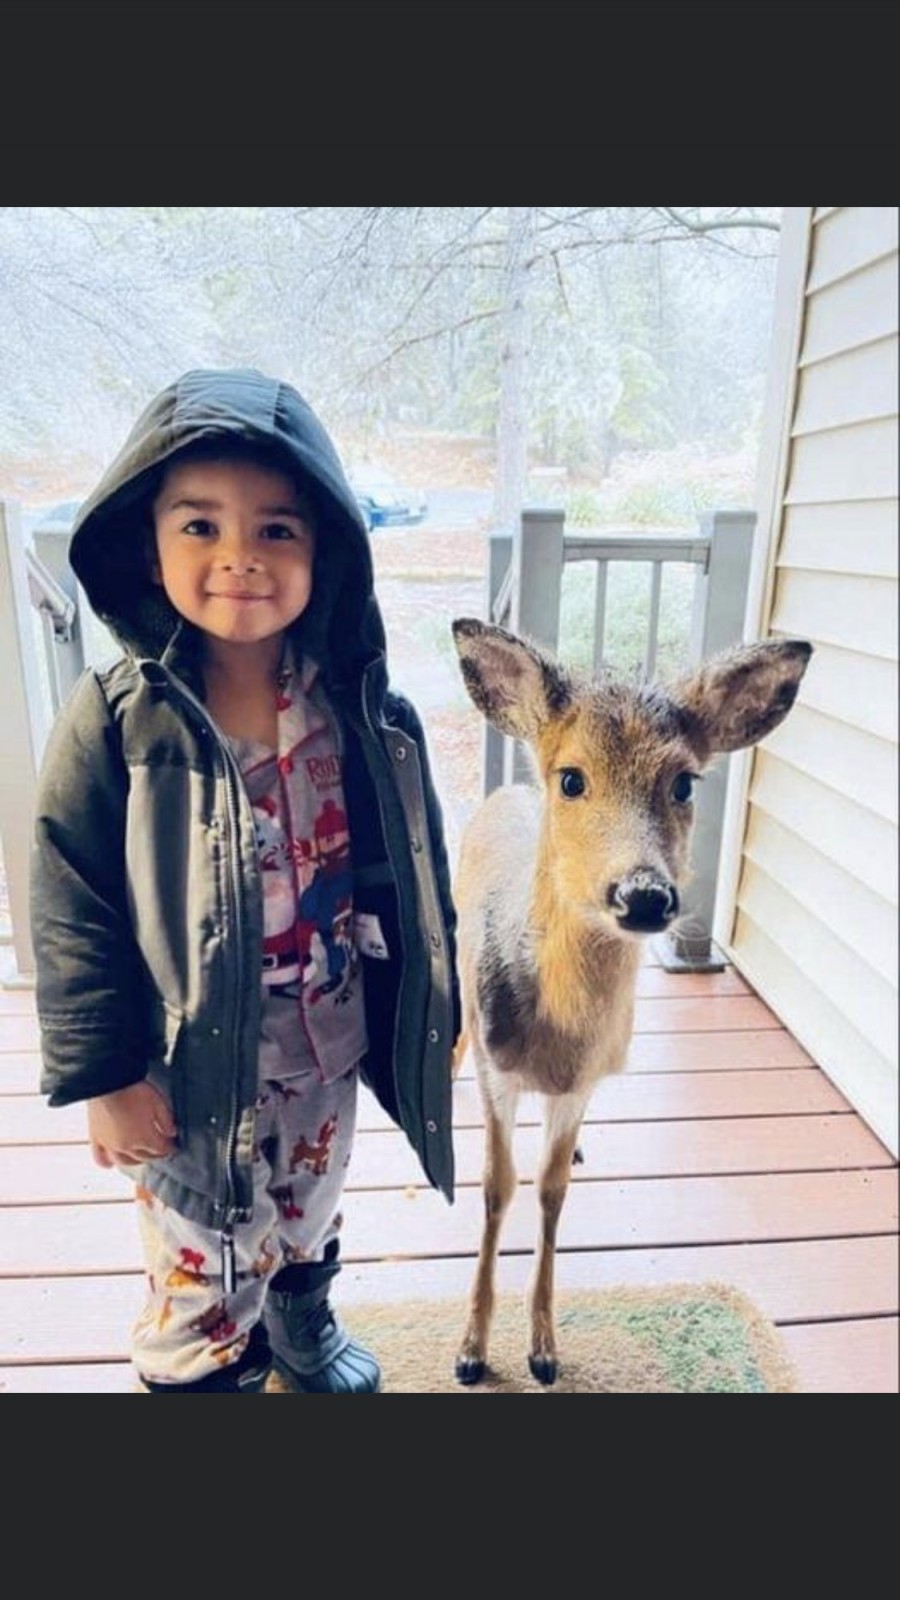 When technology allows us to capture moments in time to share with others of our kind… Here is a child who told a deer he has cereal at home if the deer would like to have some!… And the deer fallows him to his home.